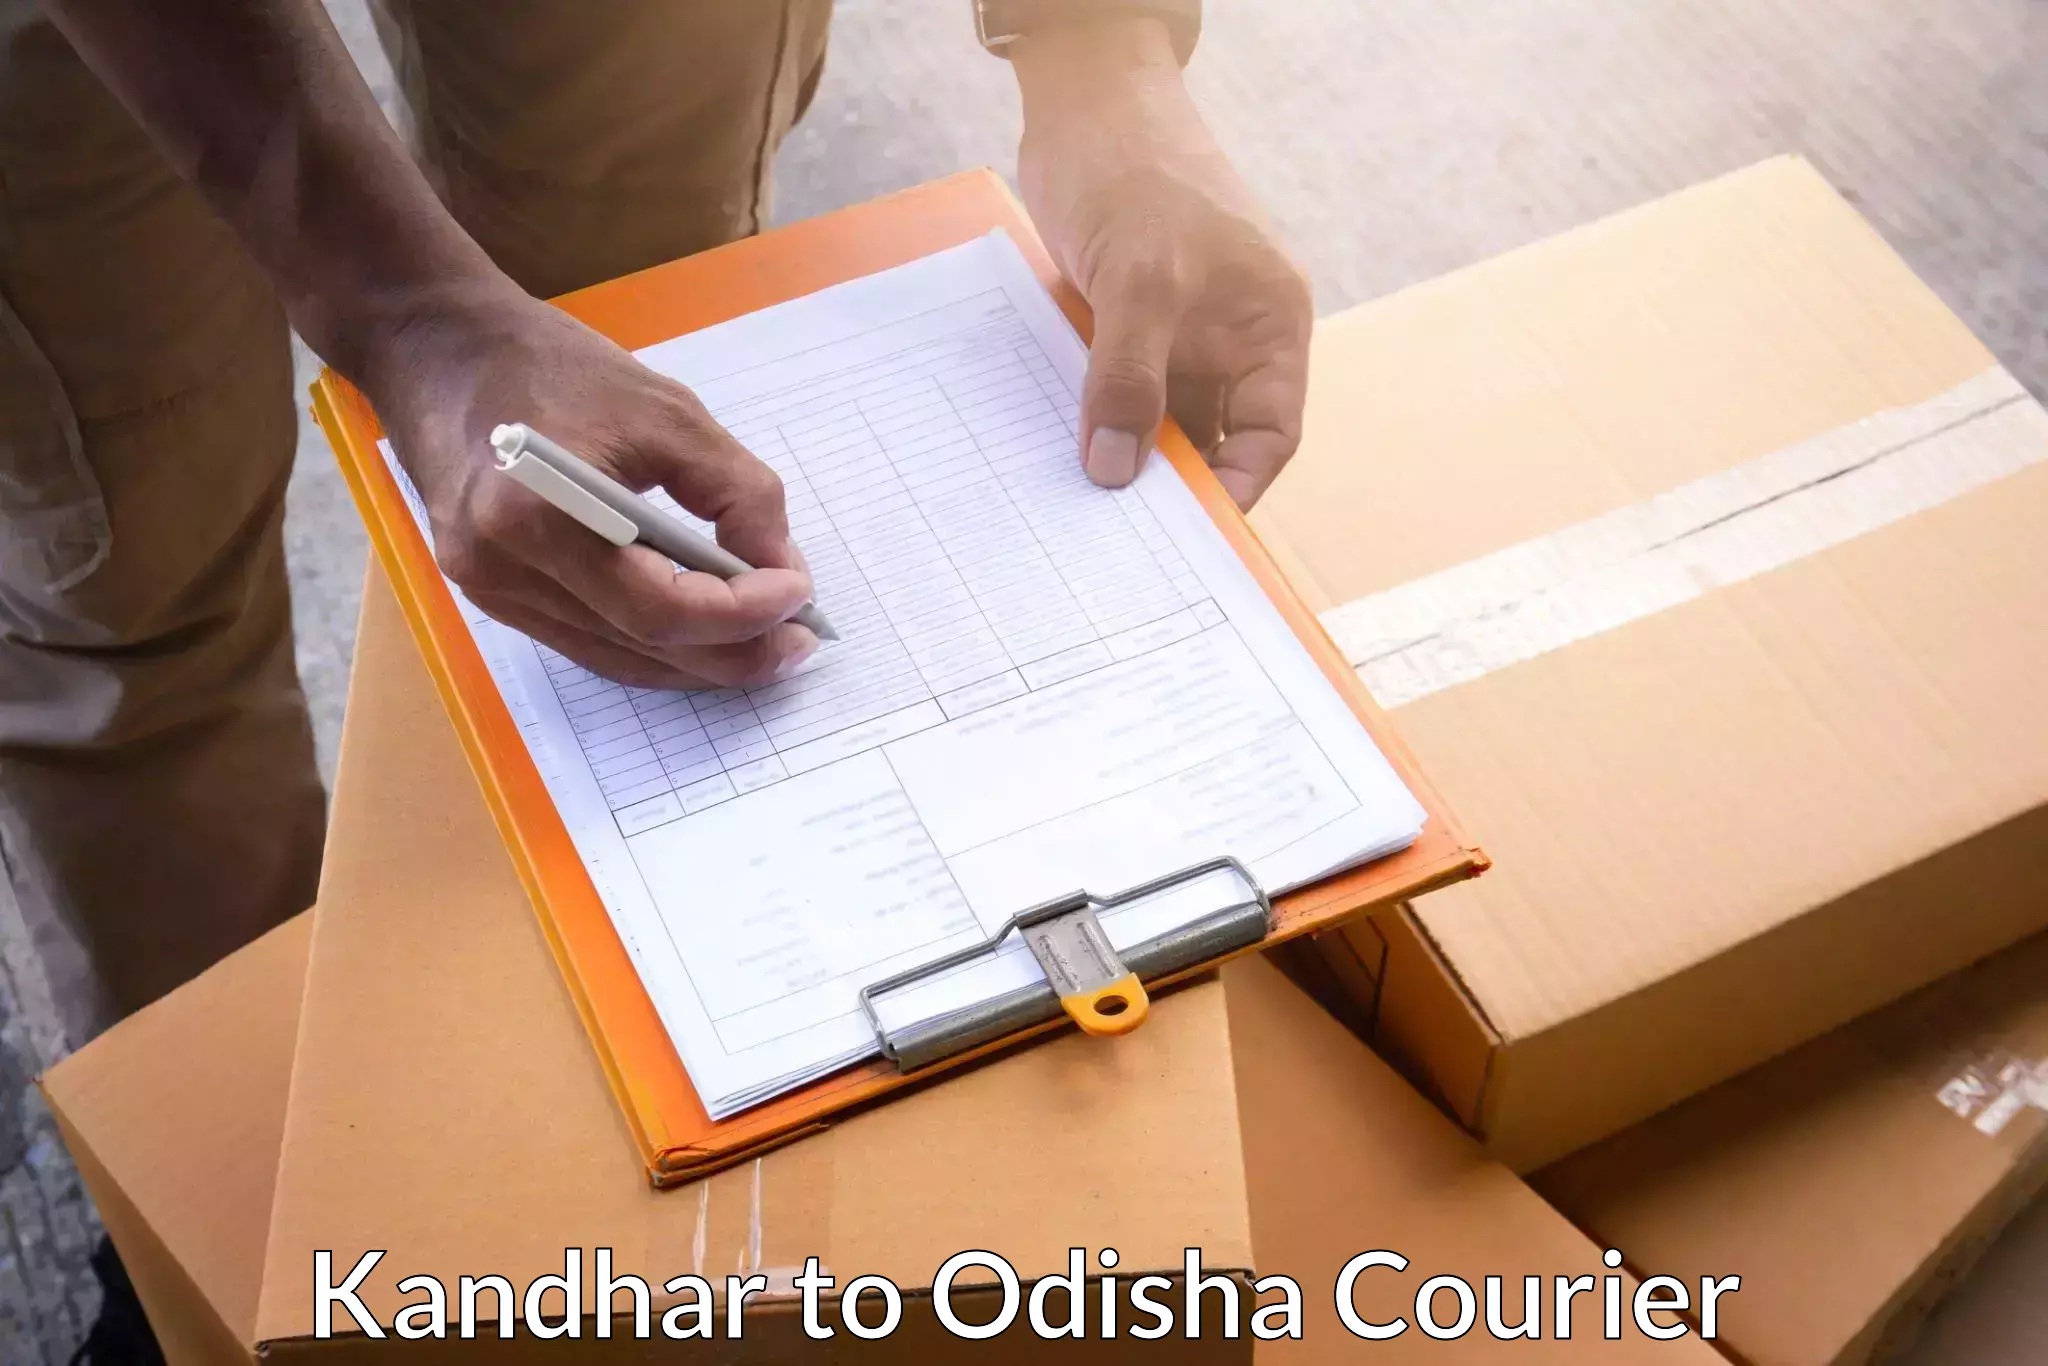 Courier service efficiency Kandhar to Asika